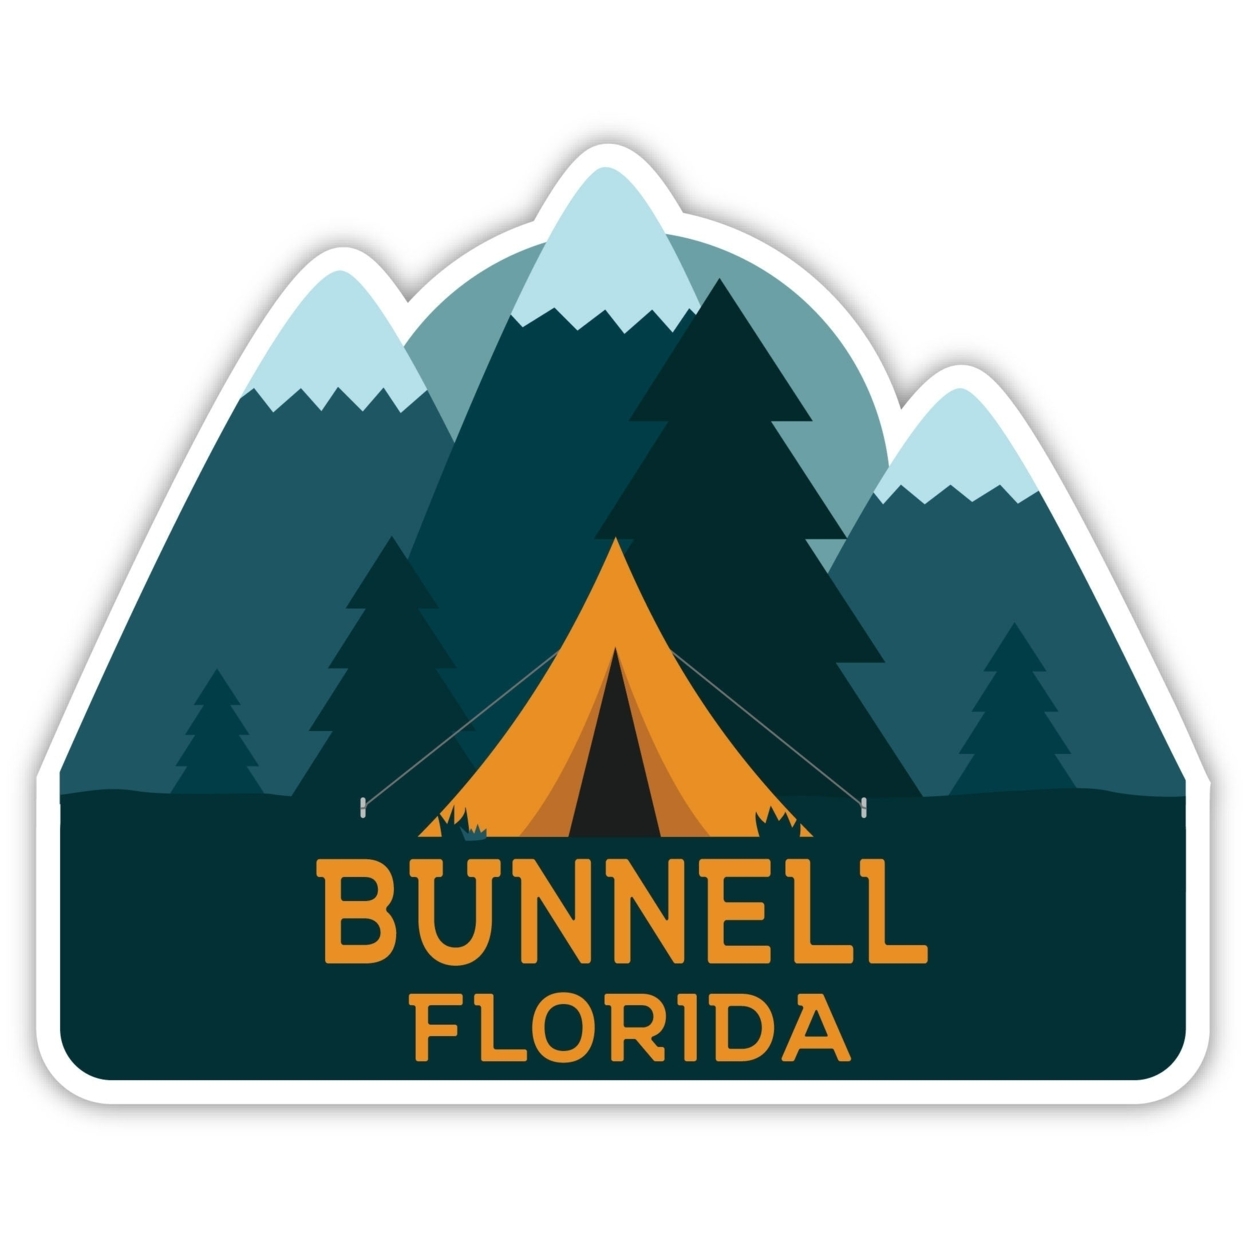 Bunnell Florida Souvenir Decorative Stickers (Choose Theme And Size) - 4-Pack, 10-Inch, Tent